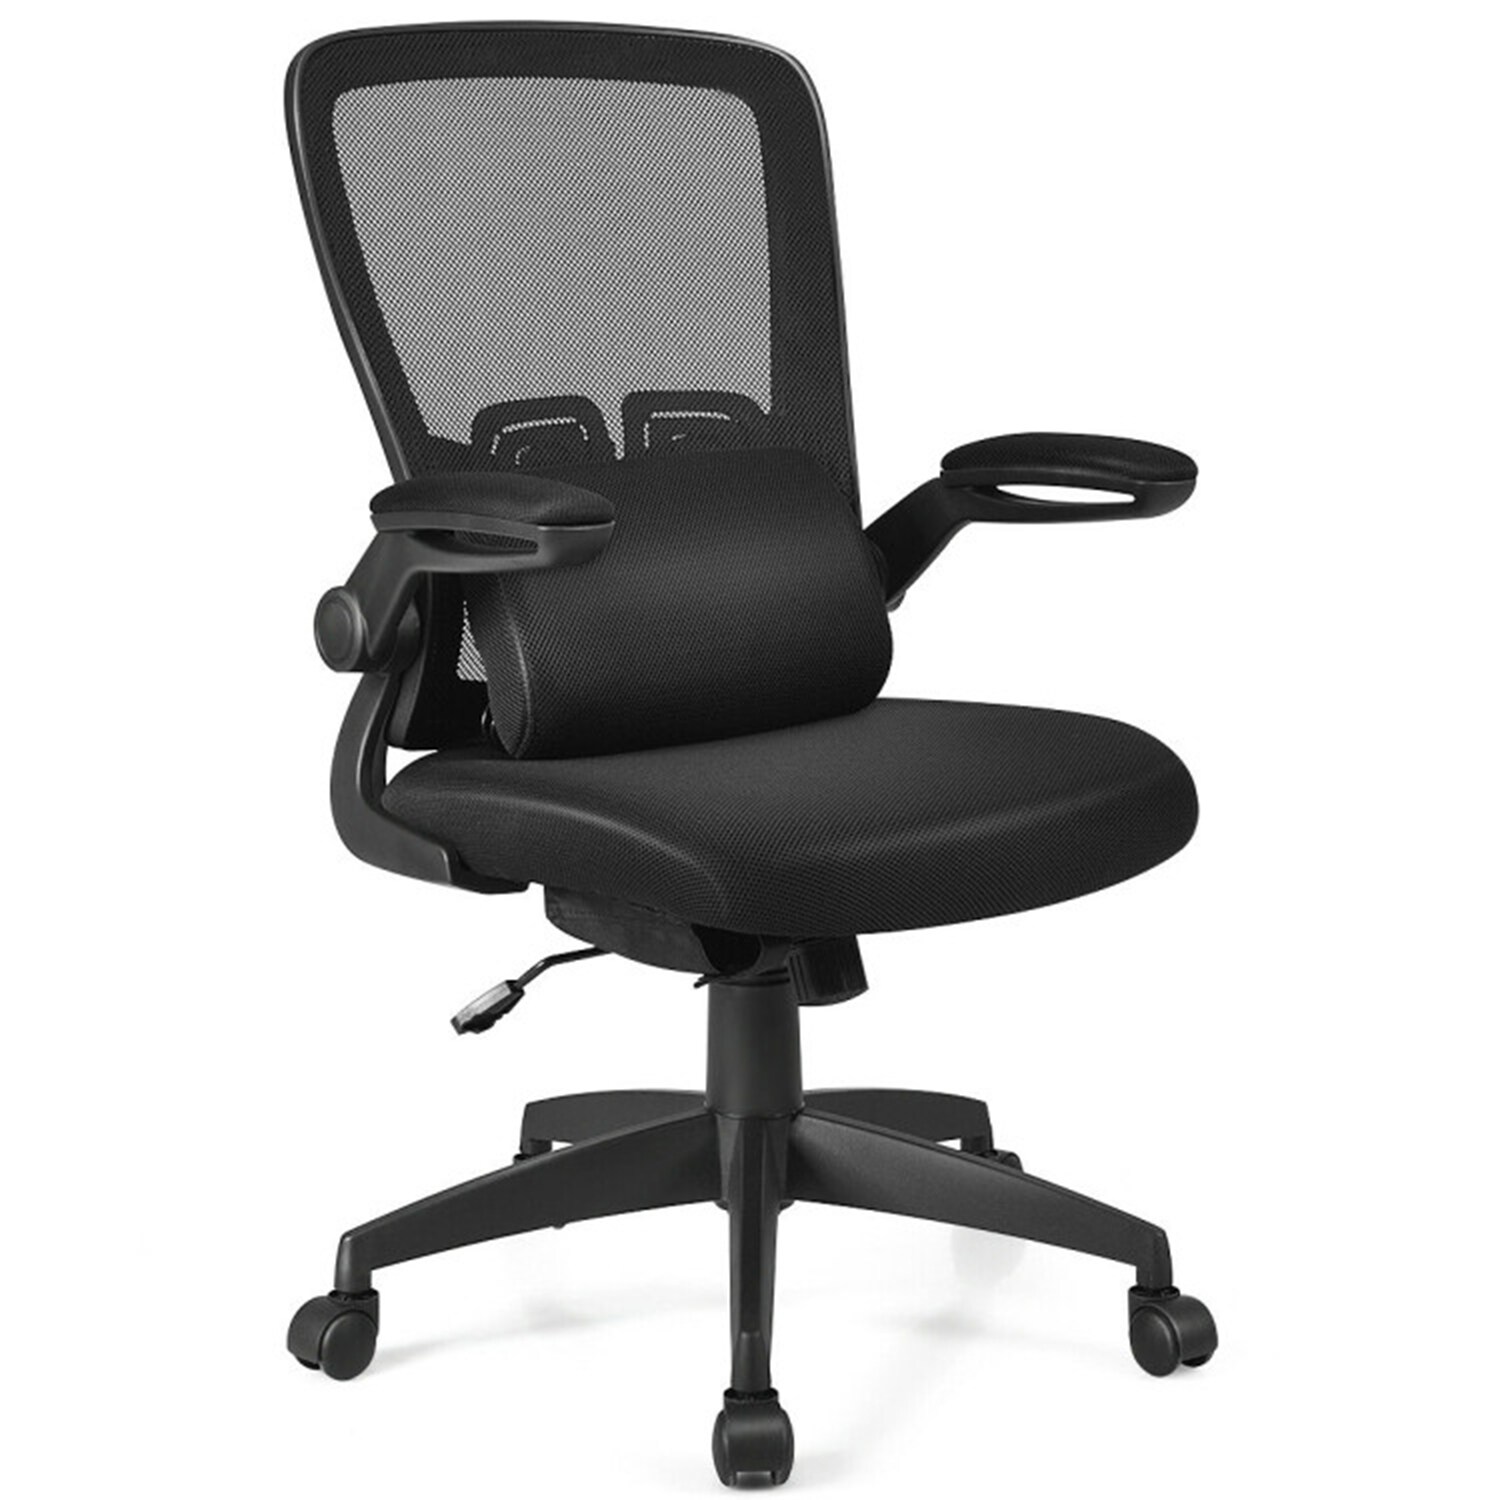 GZMR Mesh Assistant Office Chair Black Contemporary Adjustable